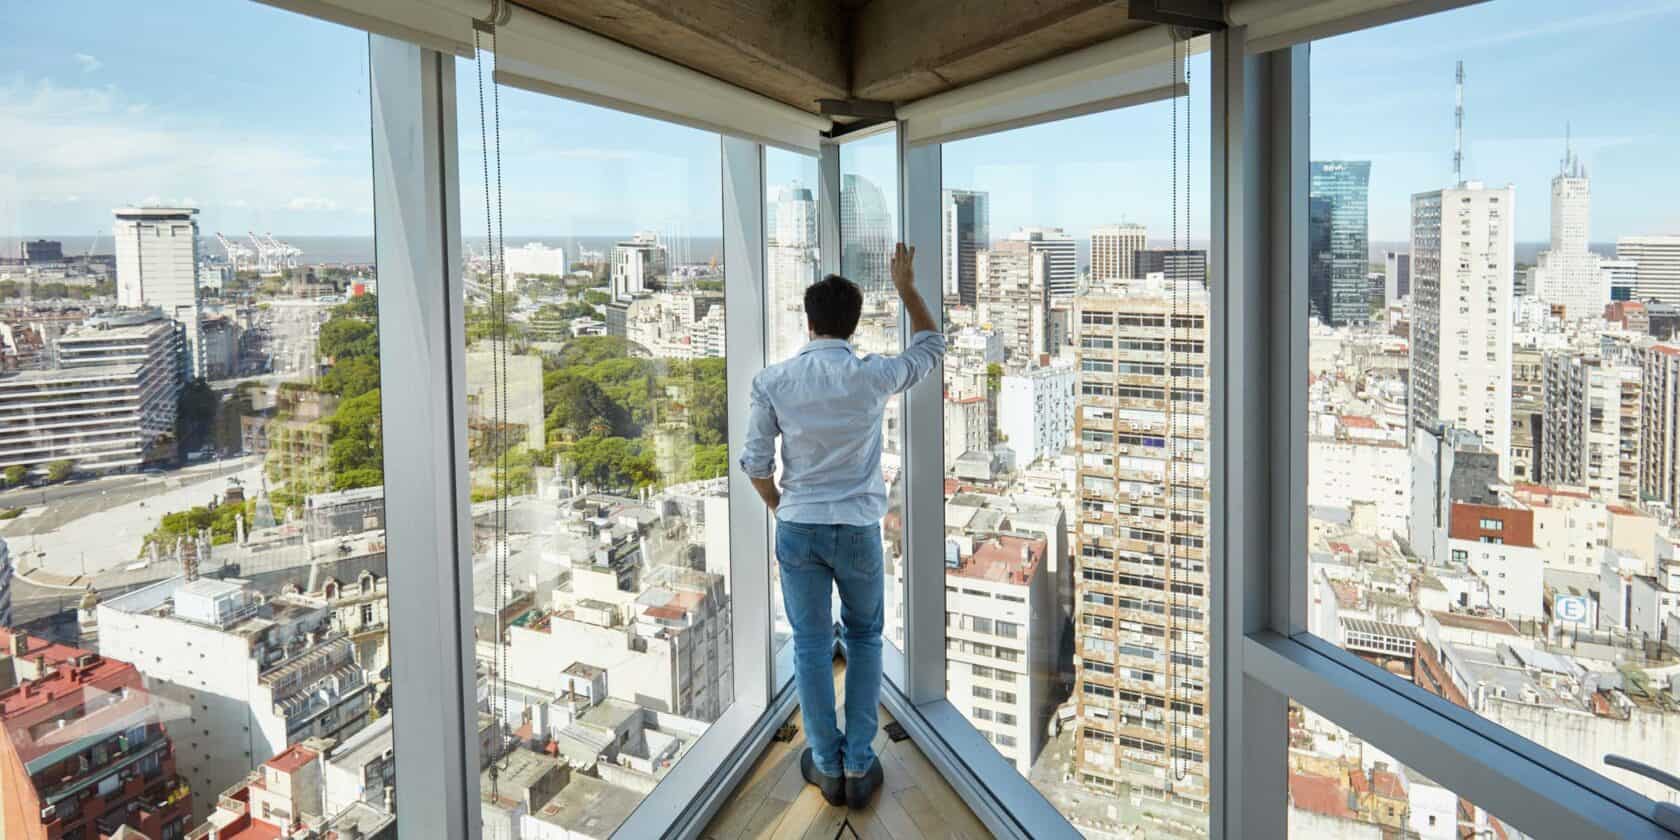 A person looking out glass windows towering over a city.